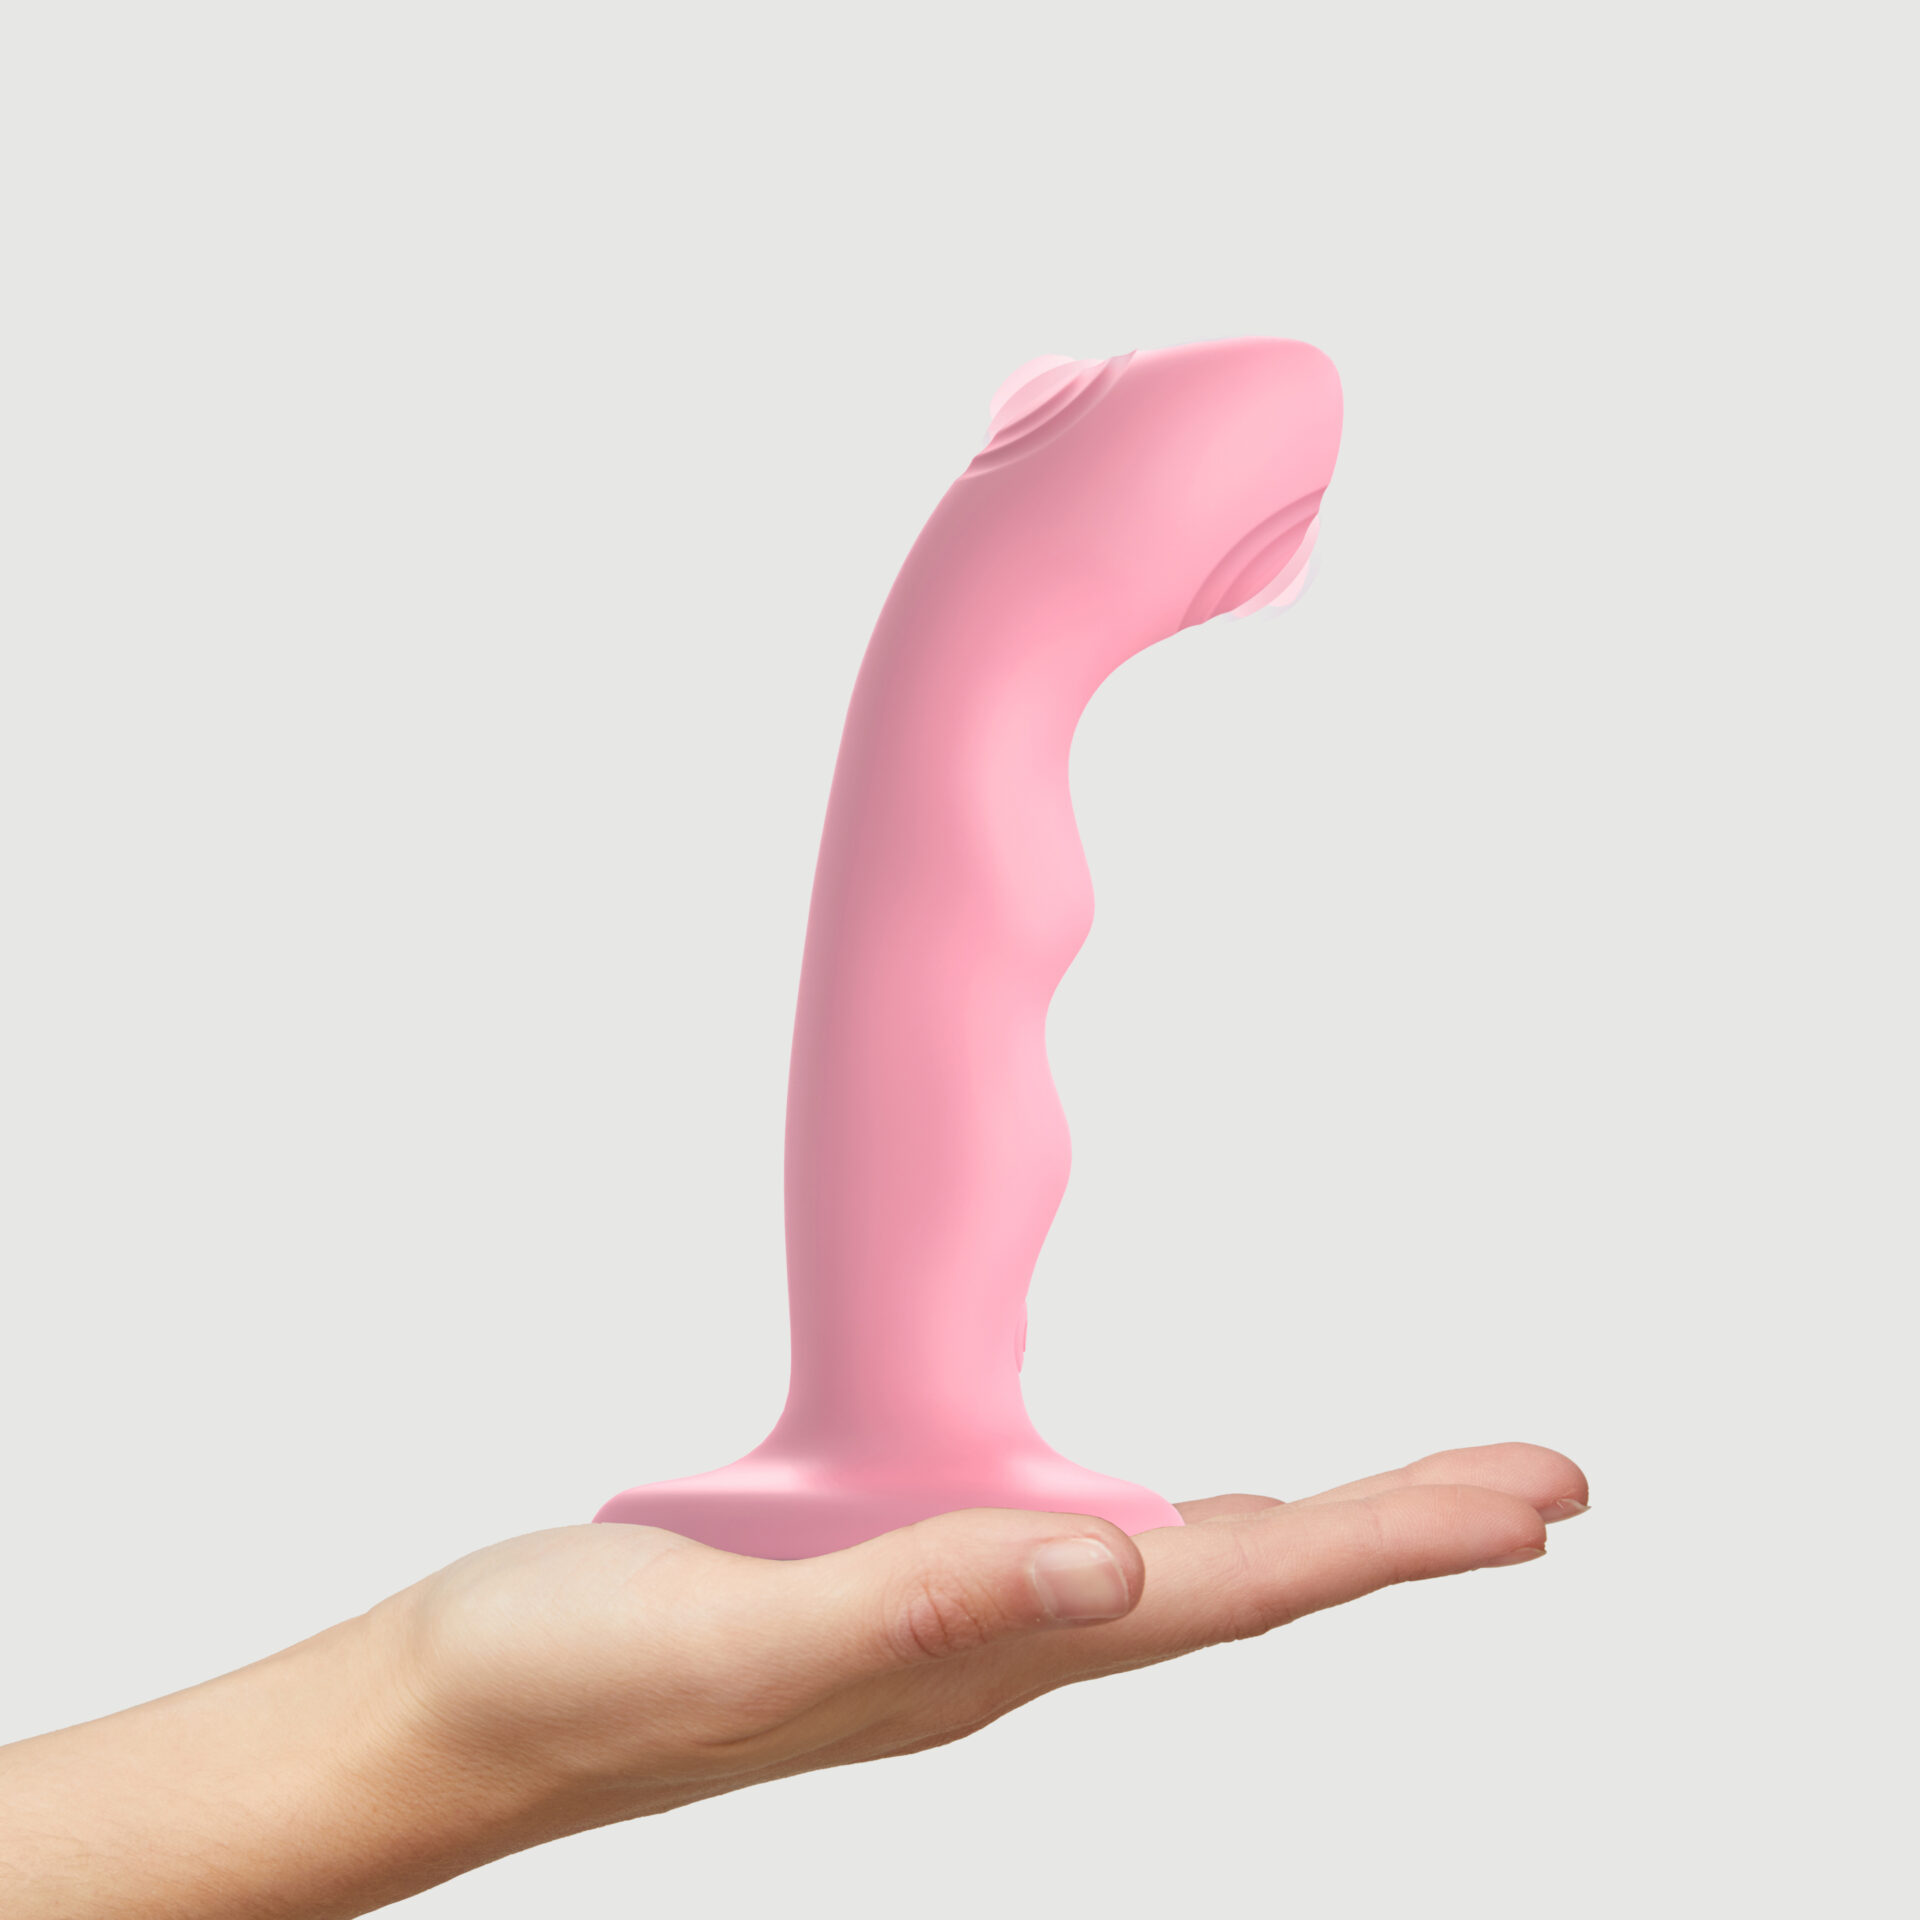 6017524 image 1 tapping dildo wave pink stap on me 2000x2000 1